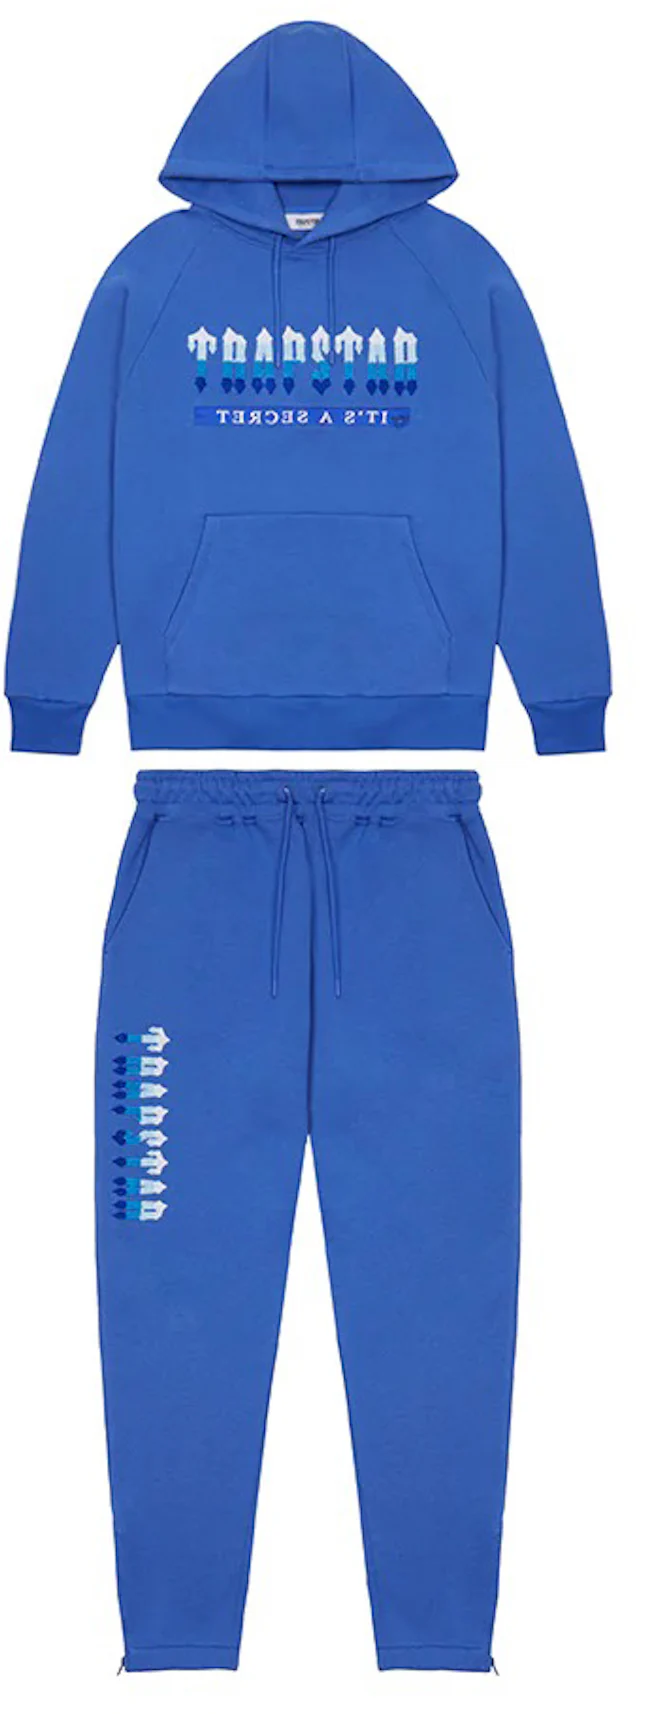 https://images.stockx.com/images/Trapstar-Chenille-Decoded-20-Hooded-Tracksuit-Dazzling-Blue.jpg?fit=fill&bg=FFFFFF&w=1200&h=857&fm=webp&auto=compress&dpr=2&trim=color&updated_at=1673460325&q=60